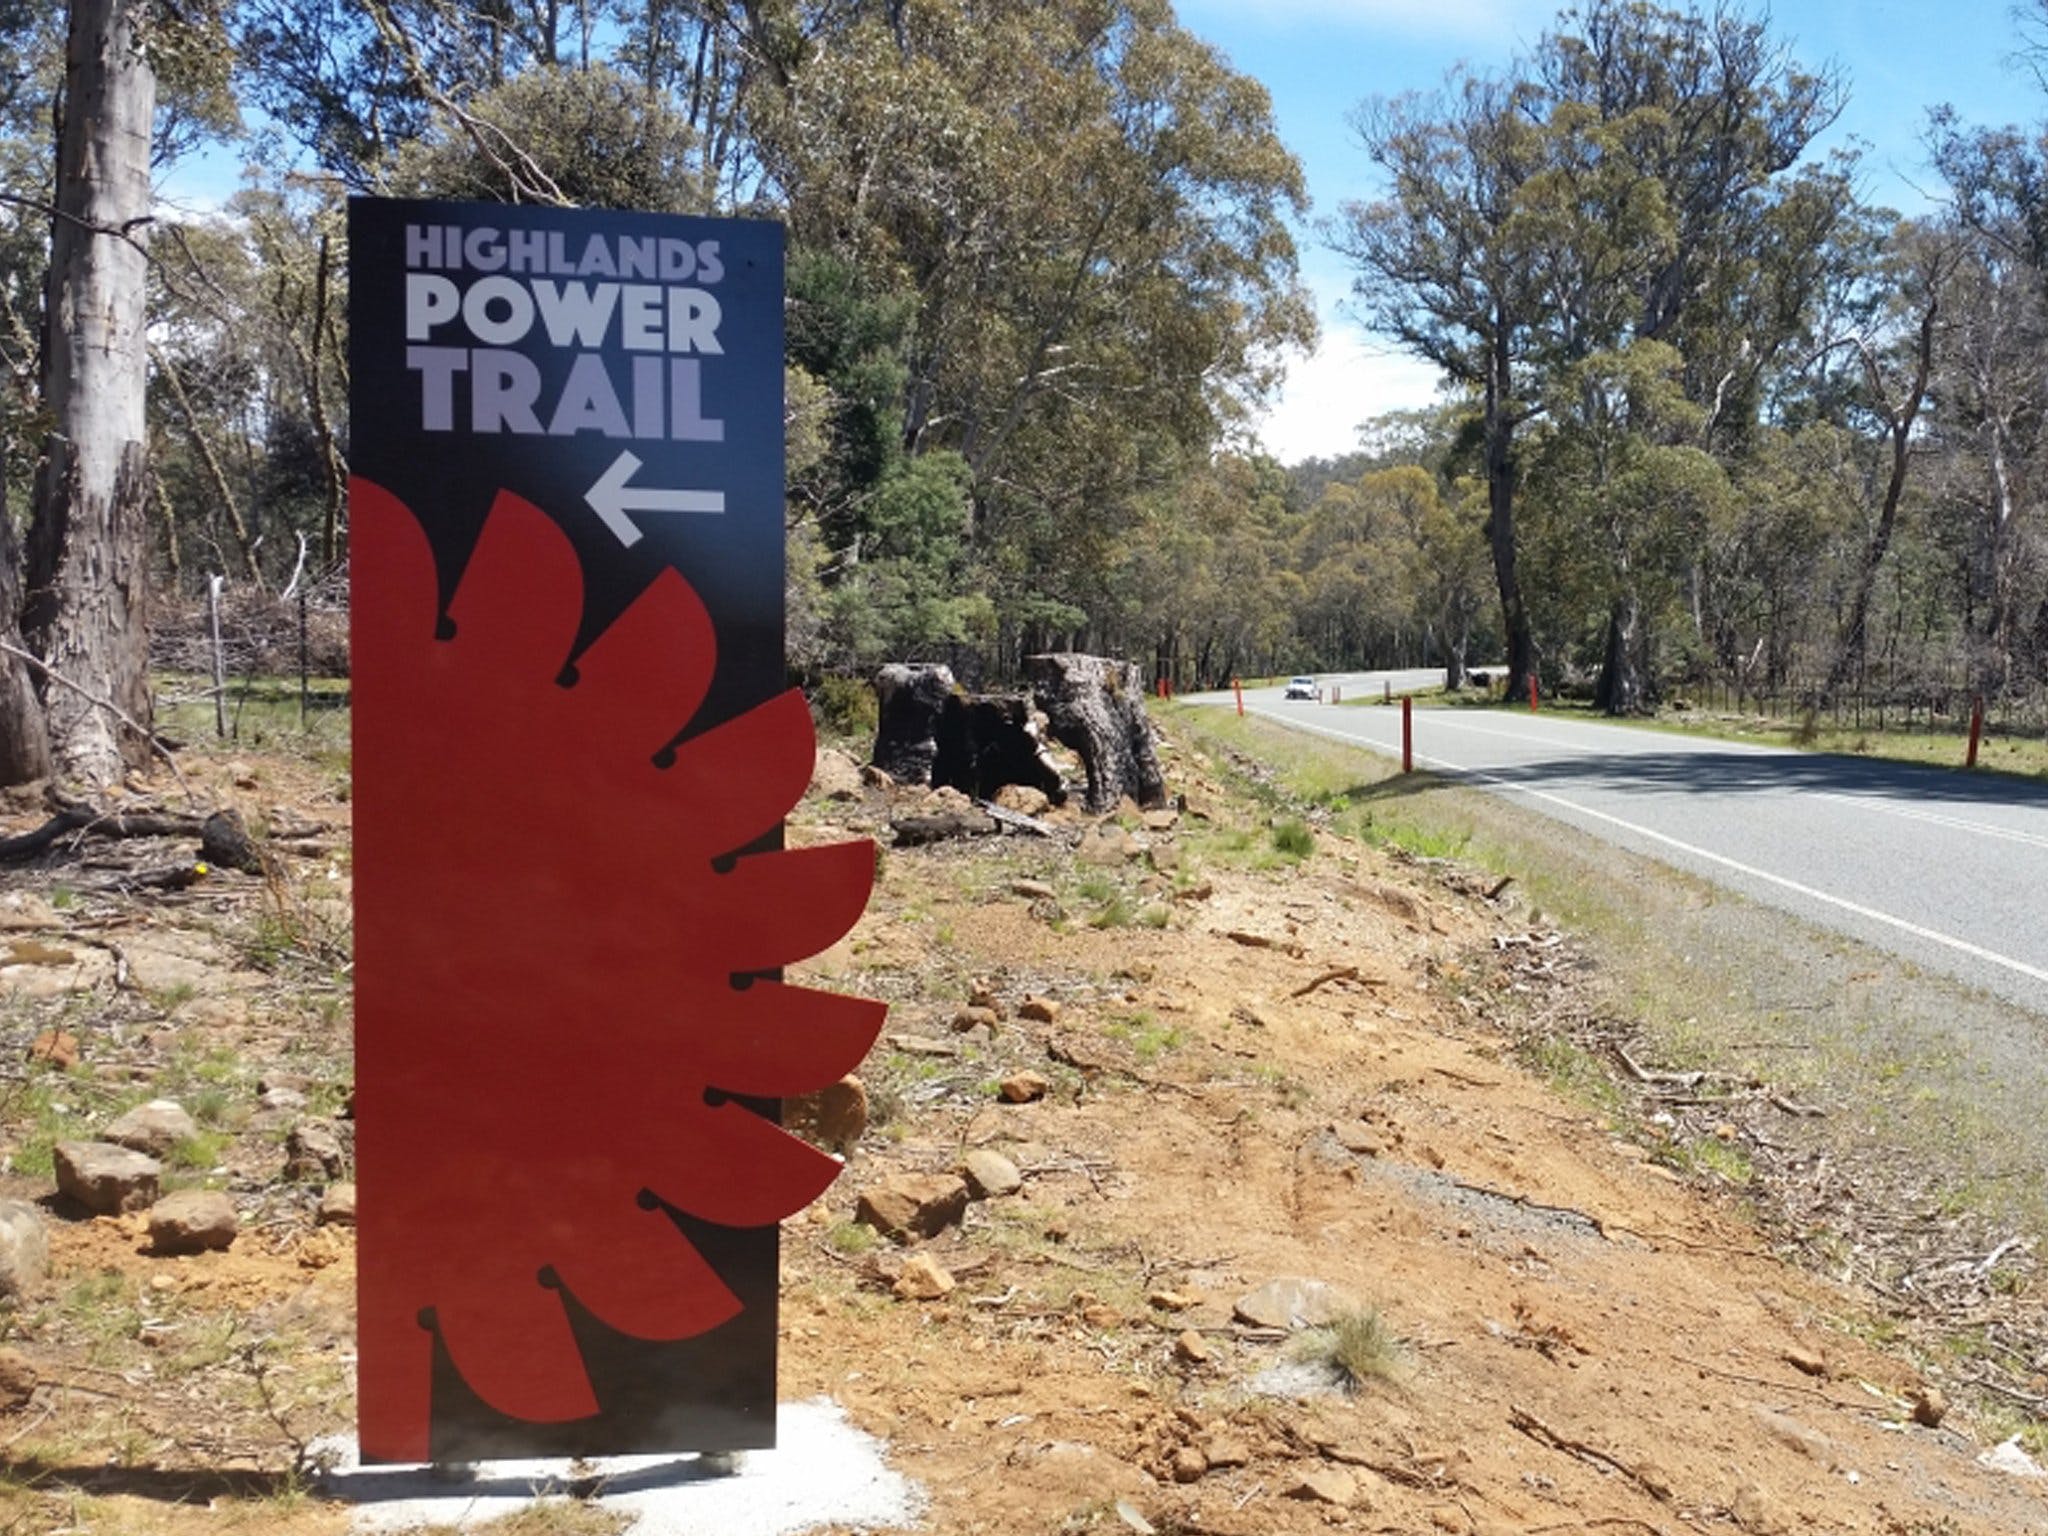 Highlands Power Trail - Tourism Adelaide